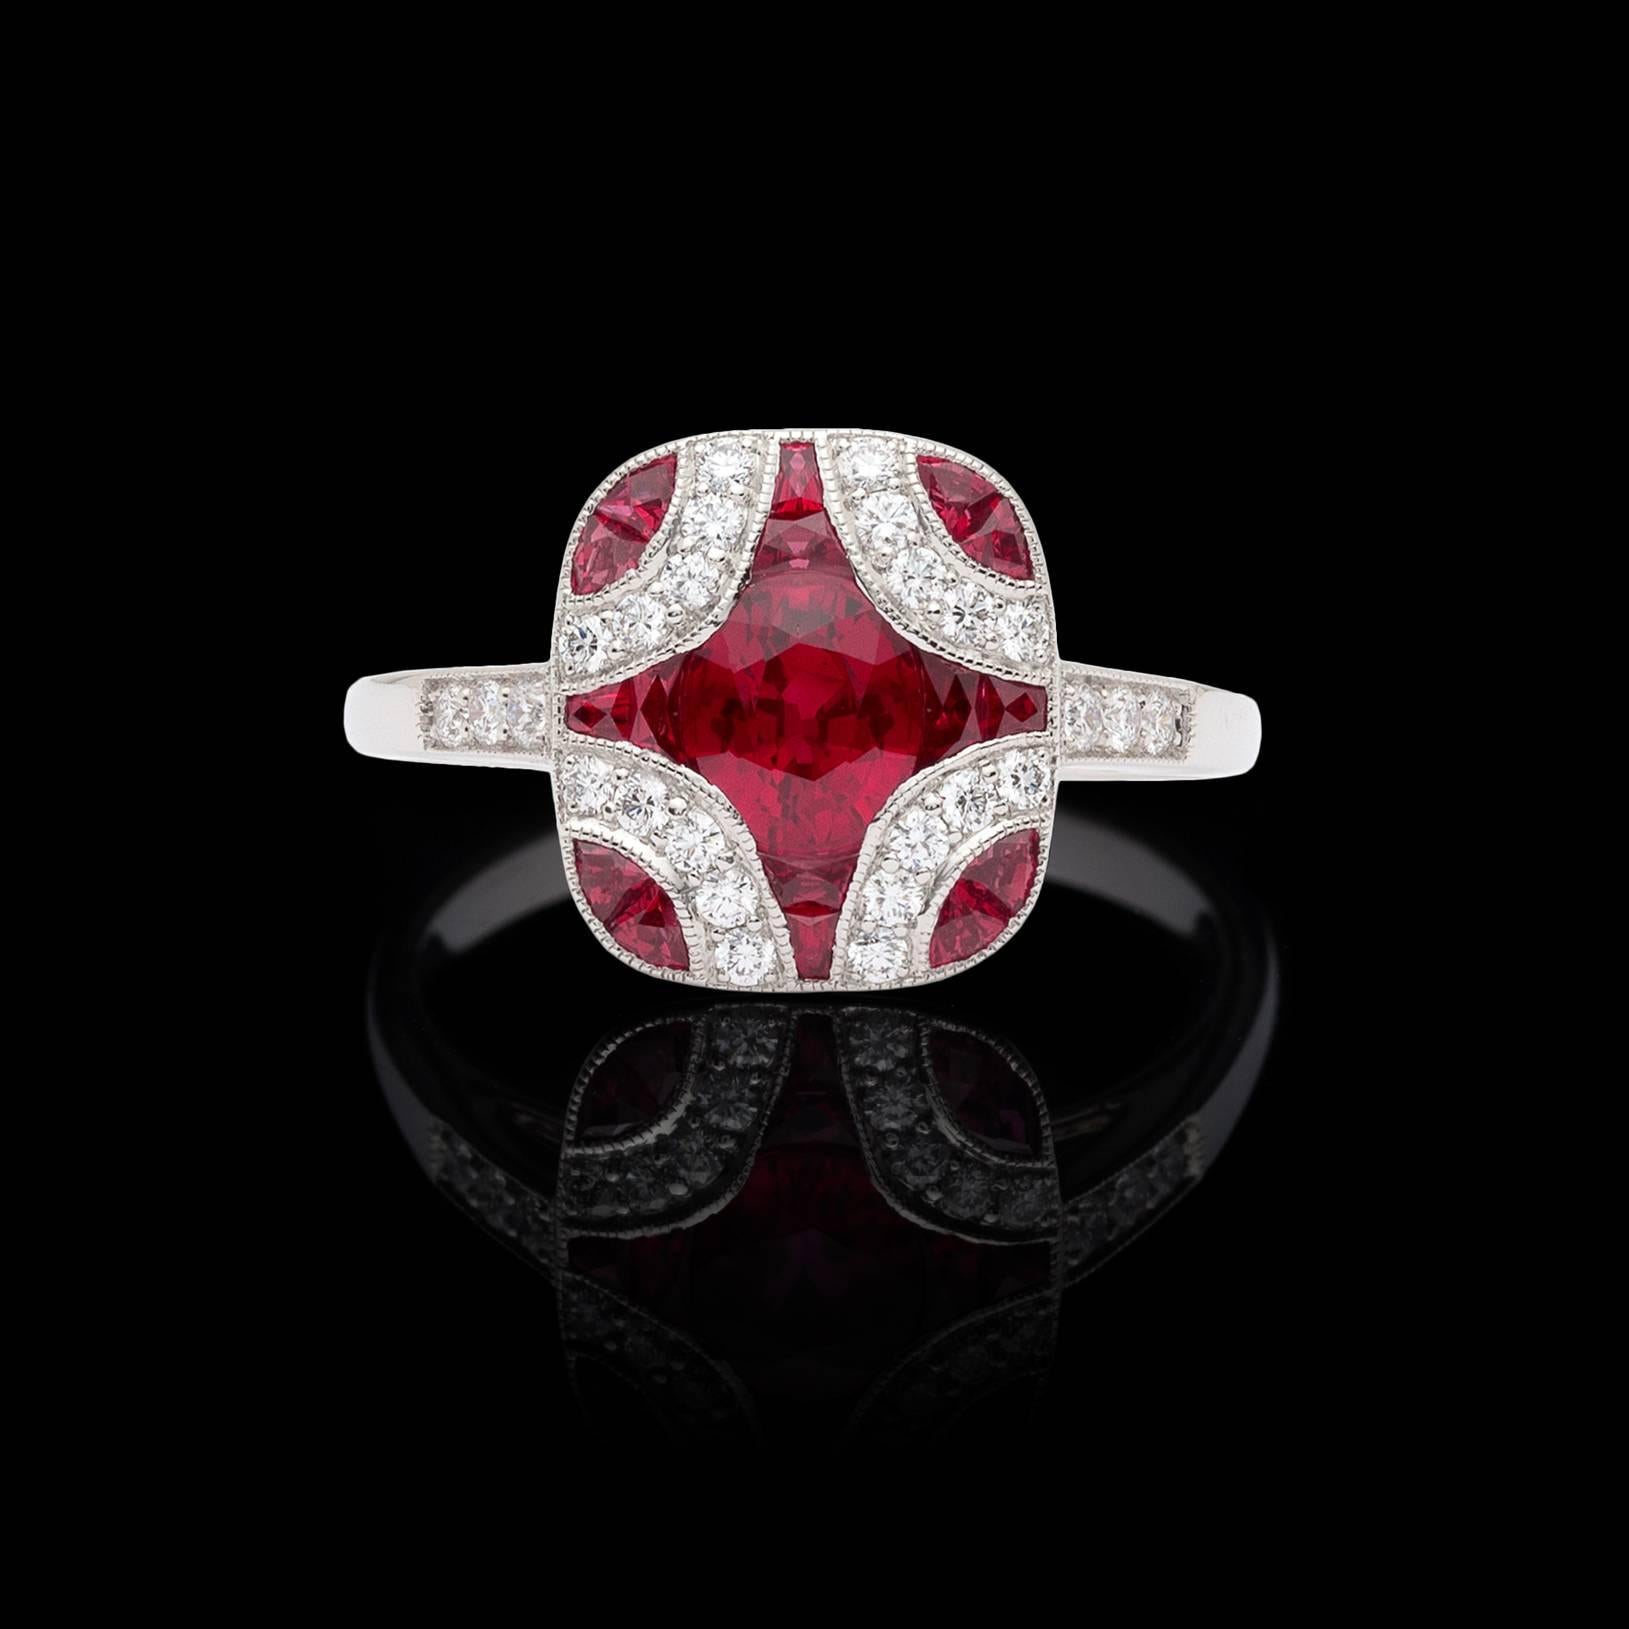 Art deco design and beautifully crafted, this platinum ring is reminiscent of an earlier era. Set with oval and calibre-cut rubies totaling 1.20 carats, and highlighted with sparkling round brilliant-cut diamonds, the ring is eye-catching and